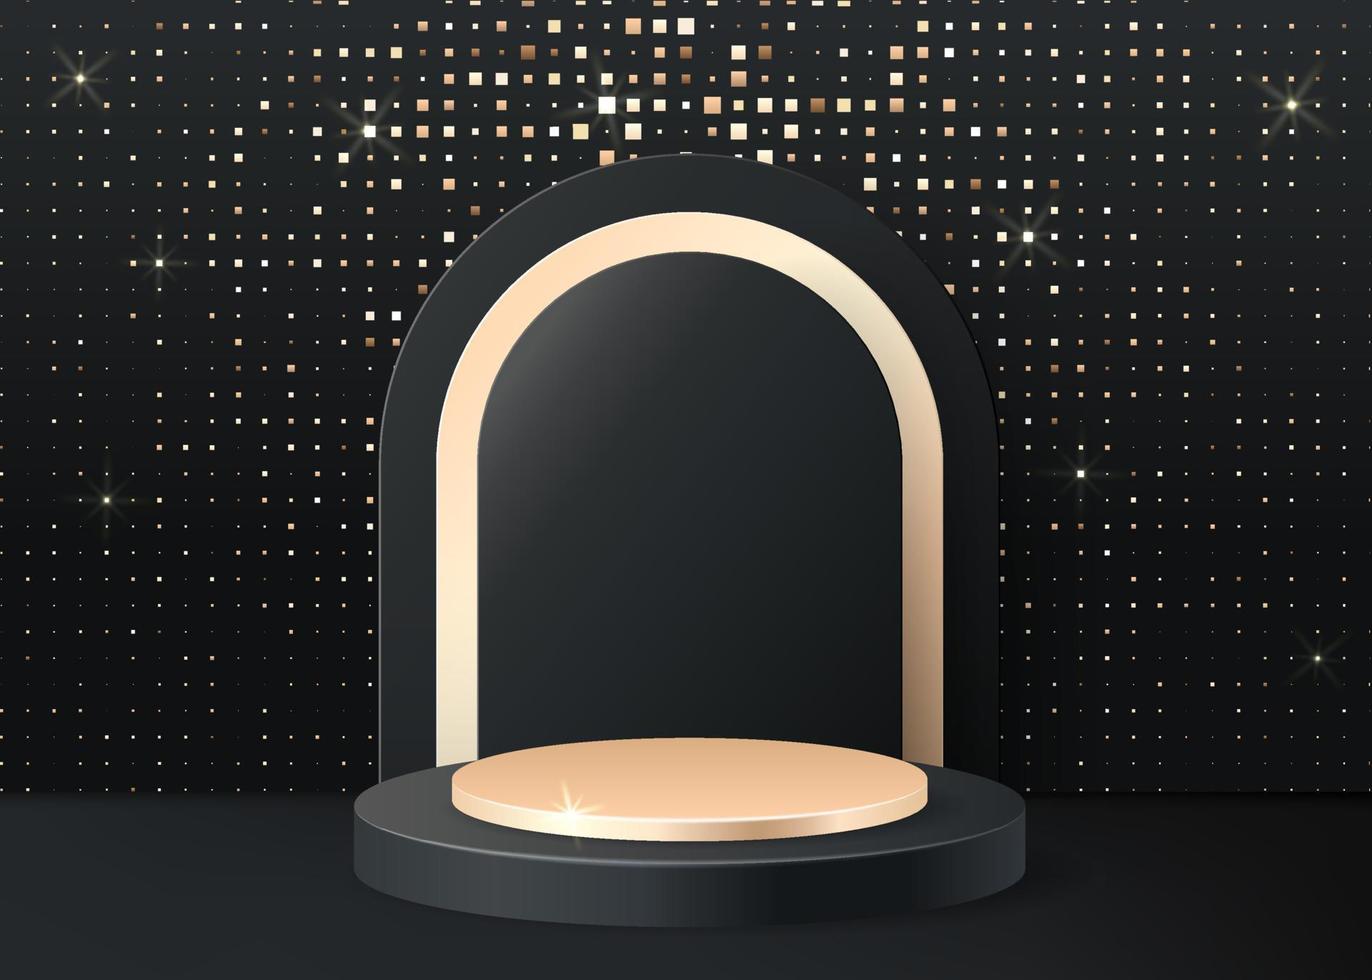 Black 3d background product display podium scene with golden geometric platform. Stand to show cosmetic product. Realistic stage showcase on pedestal display backdrop. Premium studio, mosaic glitter vector